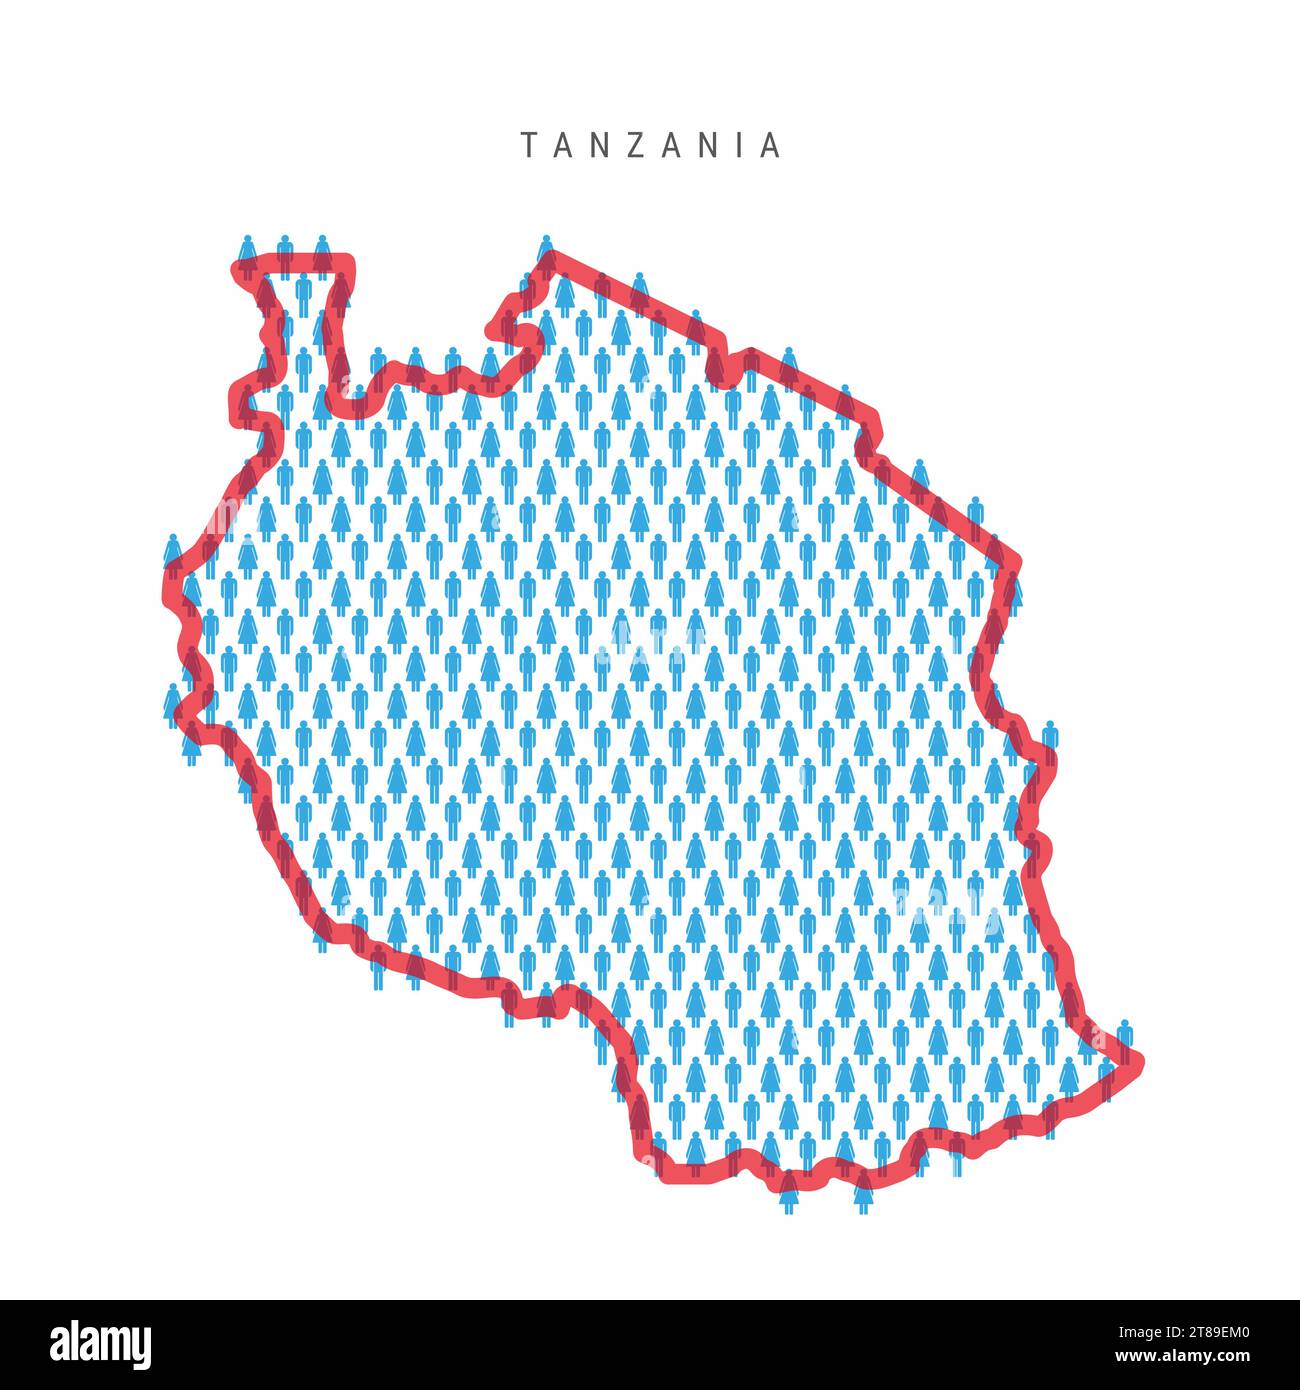 Tanzania population map. Stick figures Tanzanian people map with bold red translucent country border. Pattern of men and women icons. Isolated vector Stock Vector